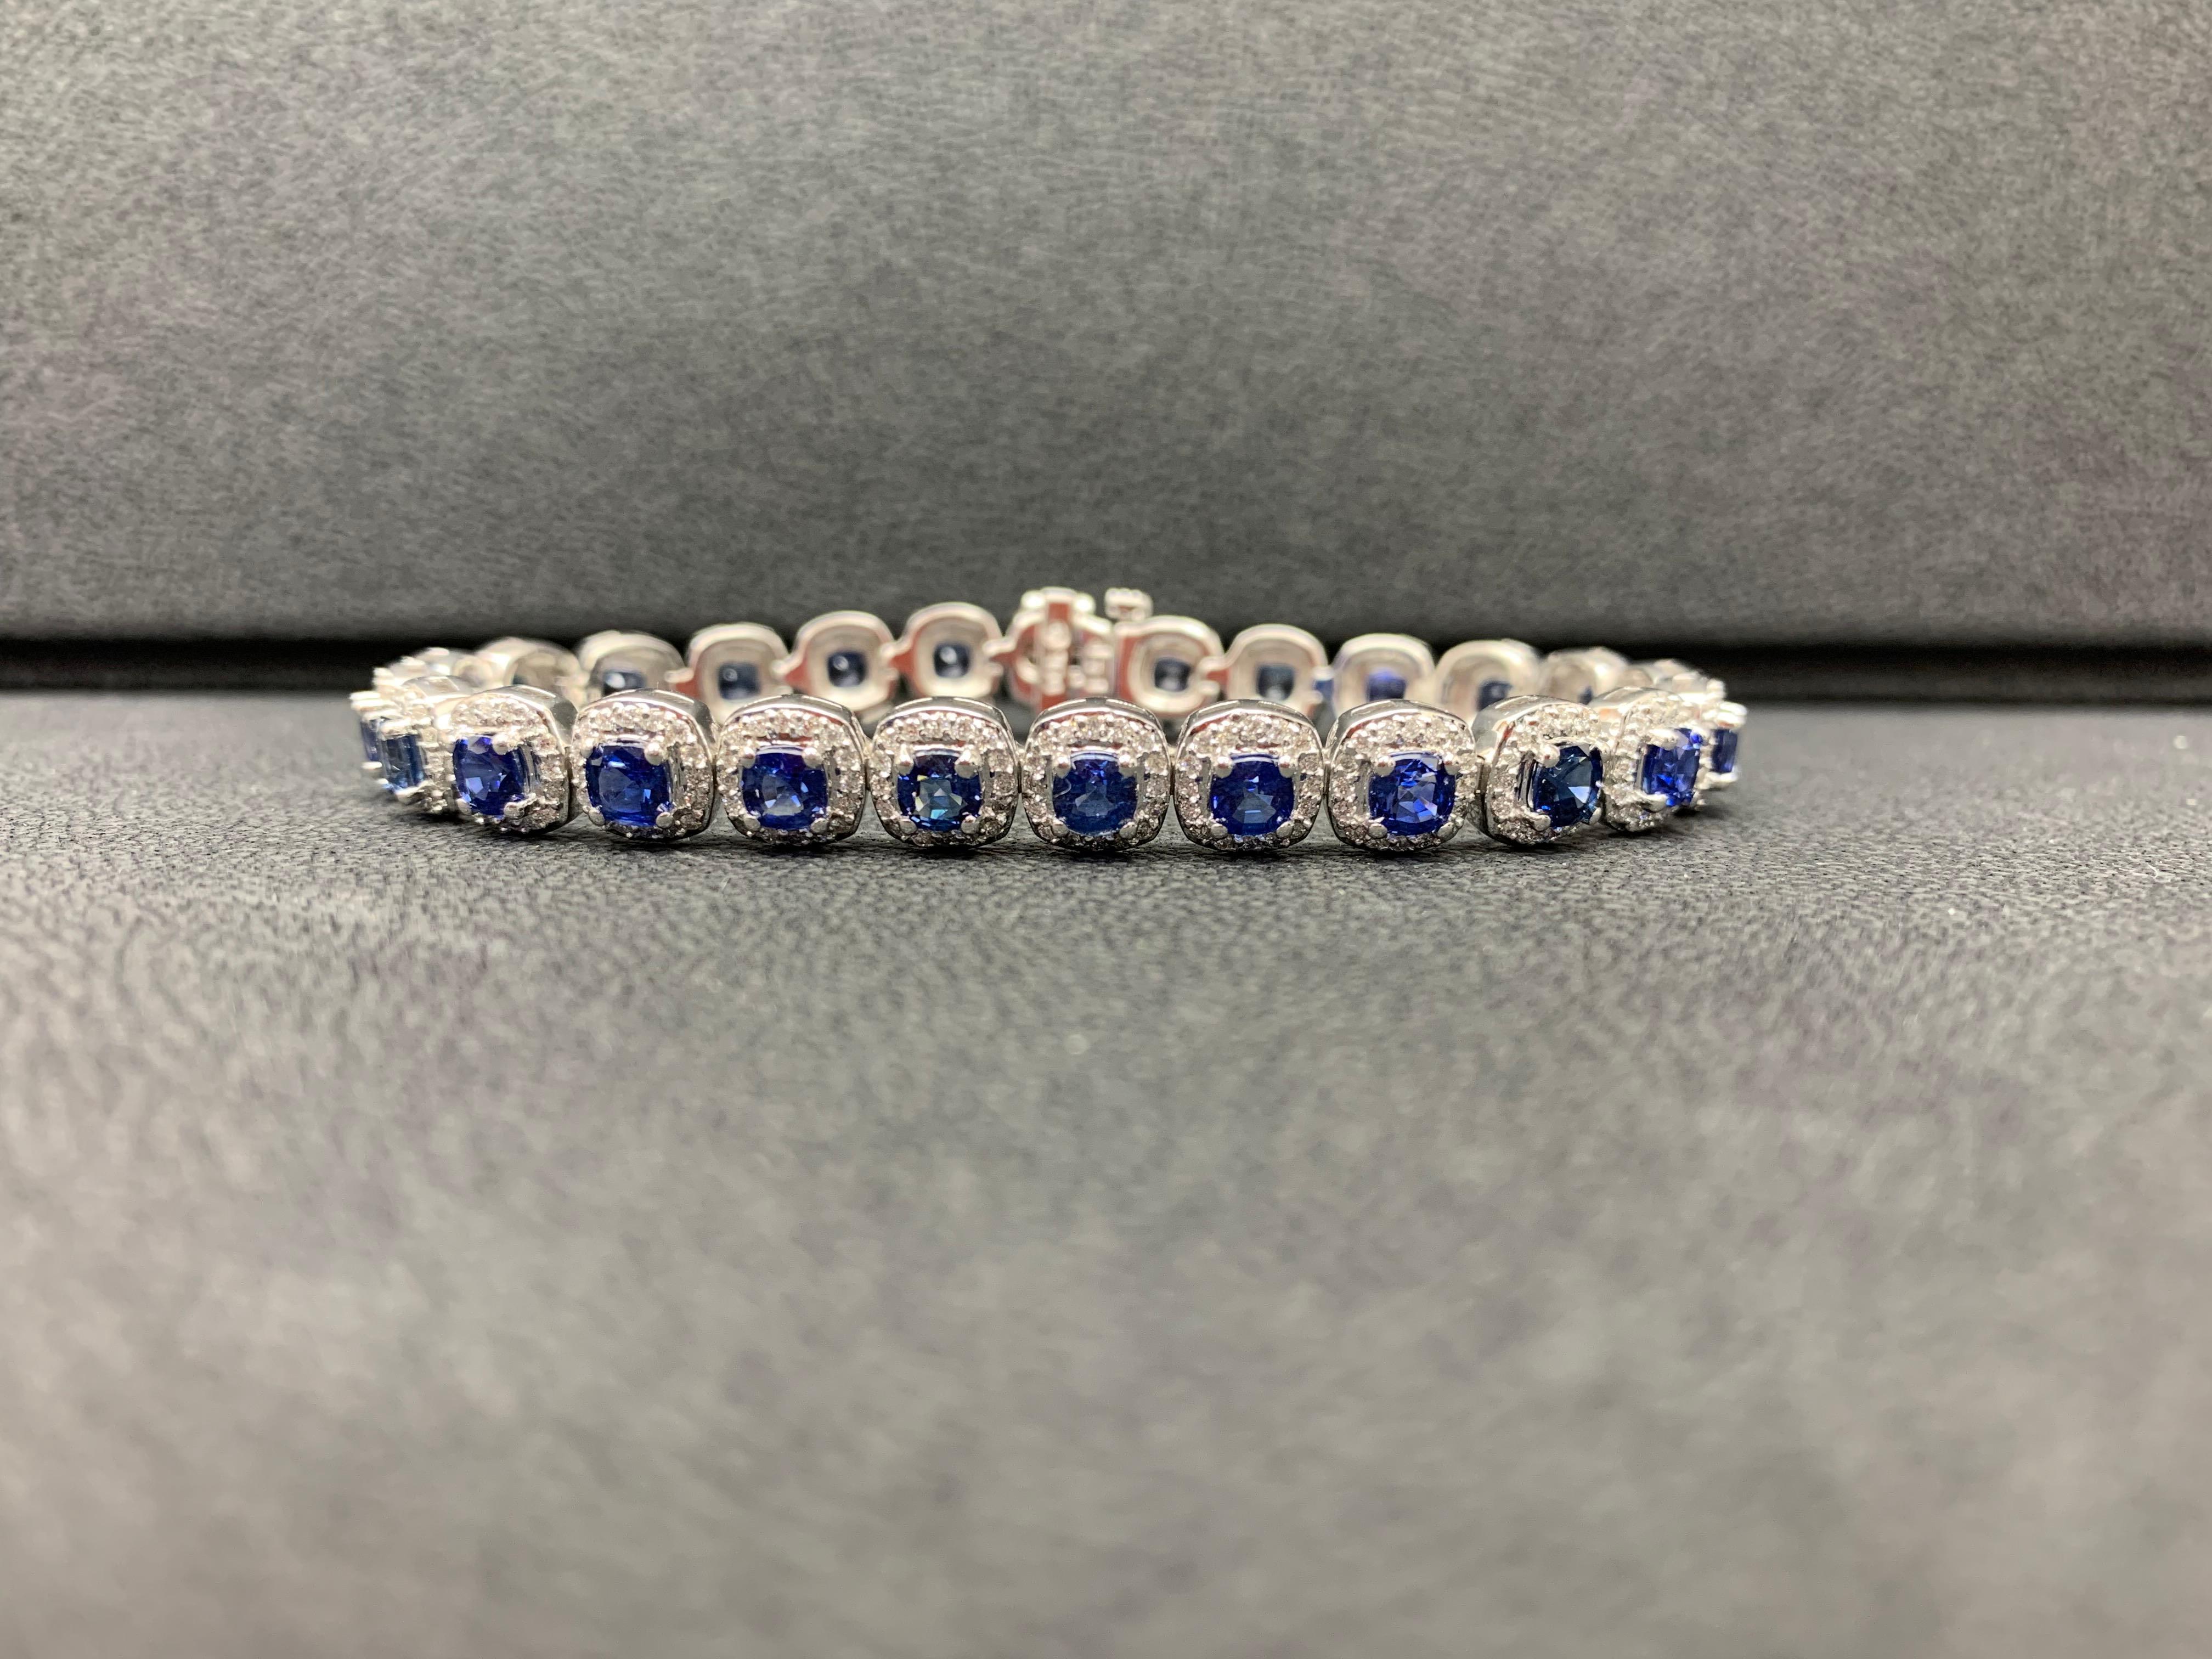 This gorgeous bracelet features 25 round brilliant blue sapphires weighing 9.50 carats total. Each stone is surrounded by a single row of small round diamonds weighing 166 carats total. Set in 14k white gold.

Style available in different price